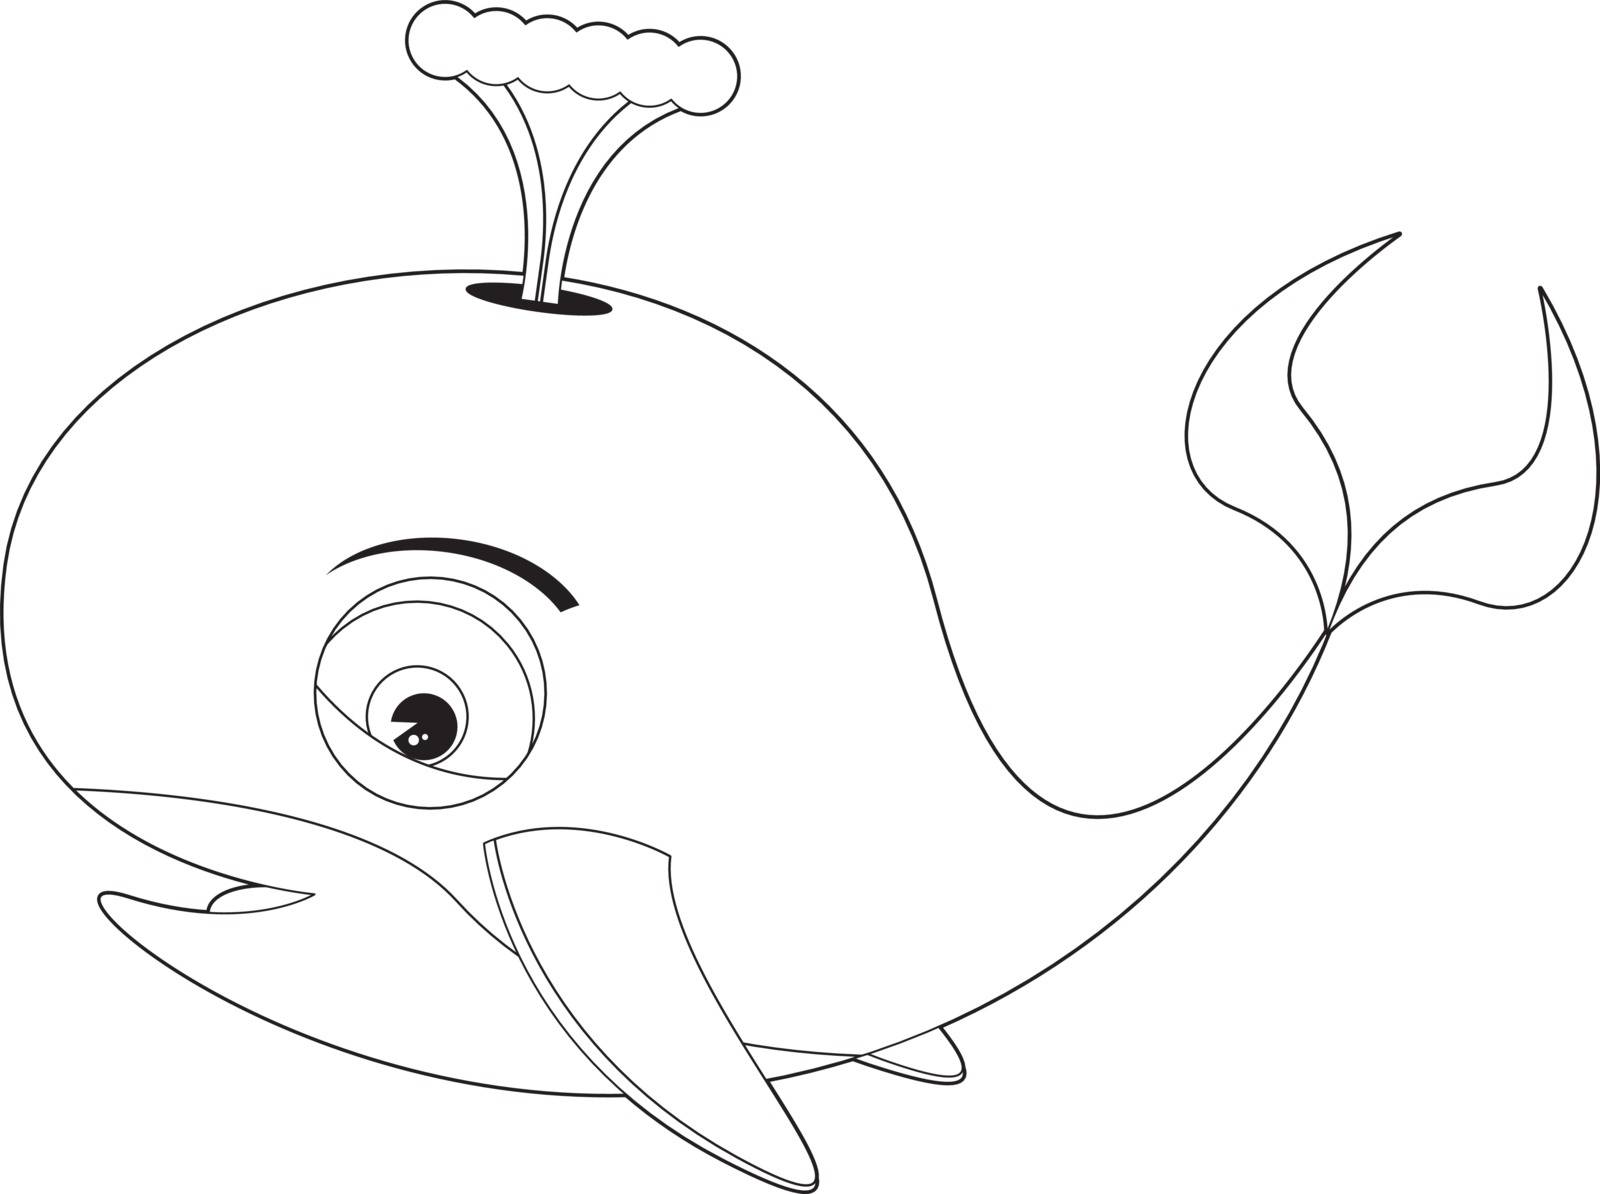 Cute Cartoon Whale in Black and White Illustration by Mark Murphy Creative